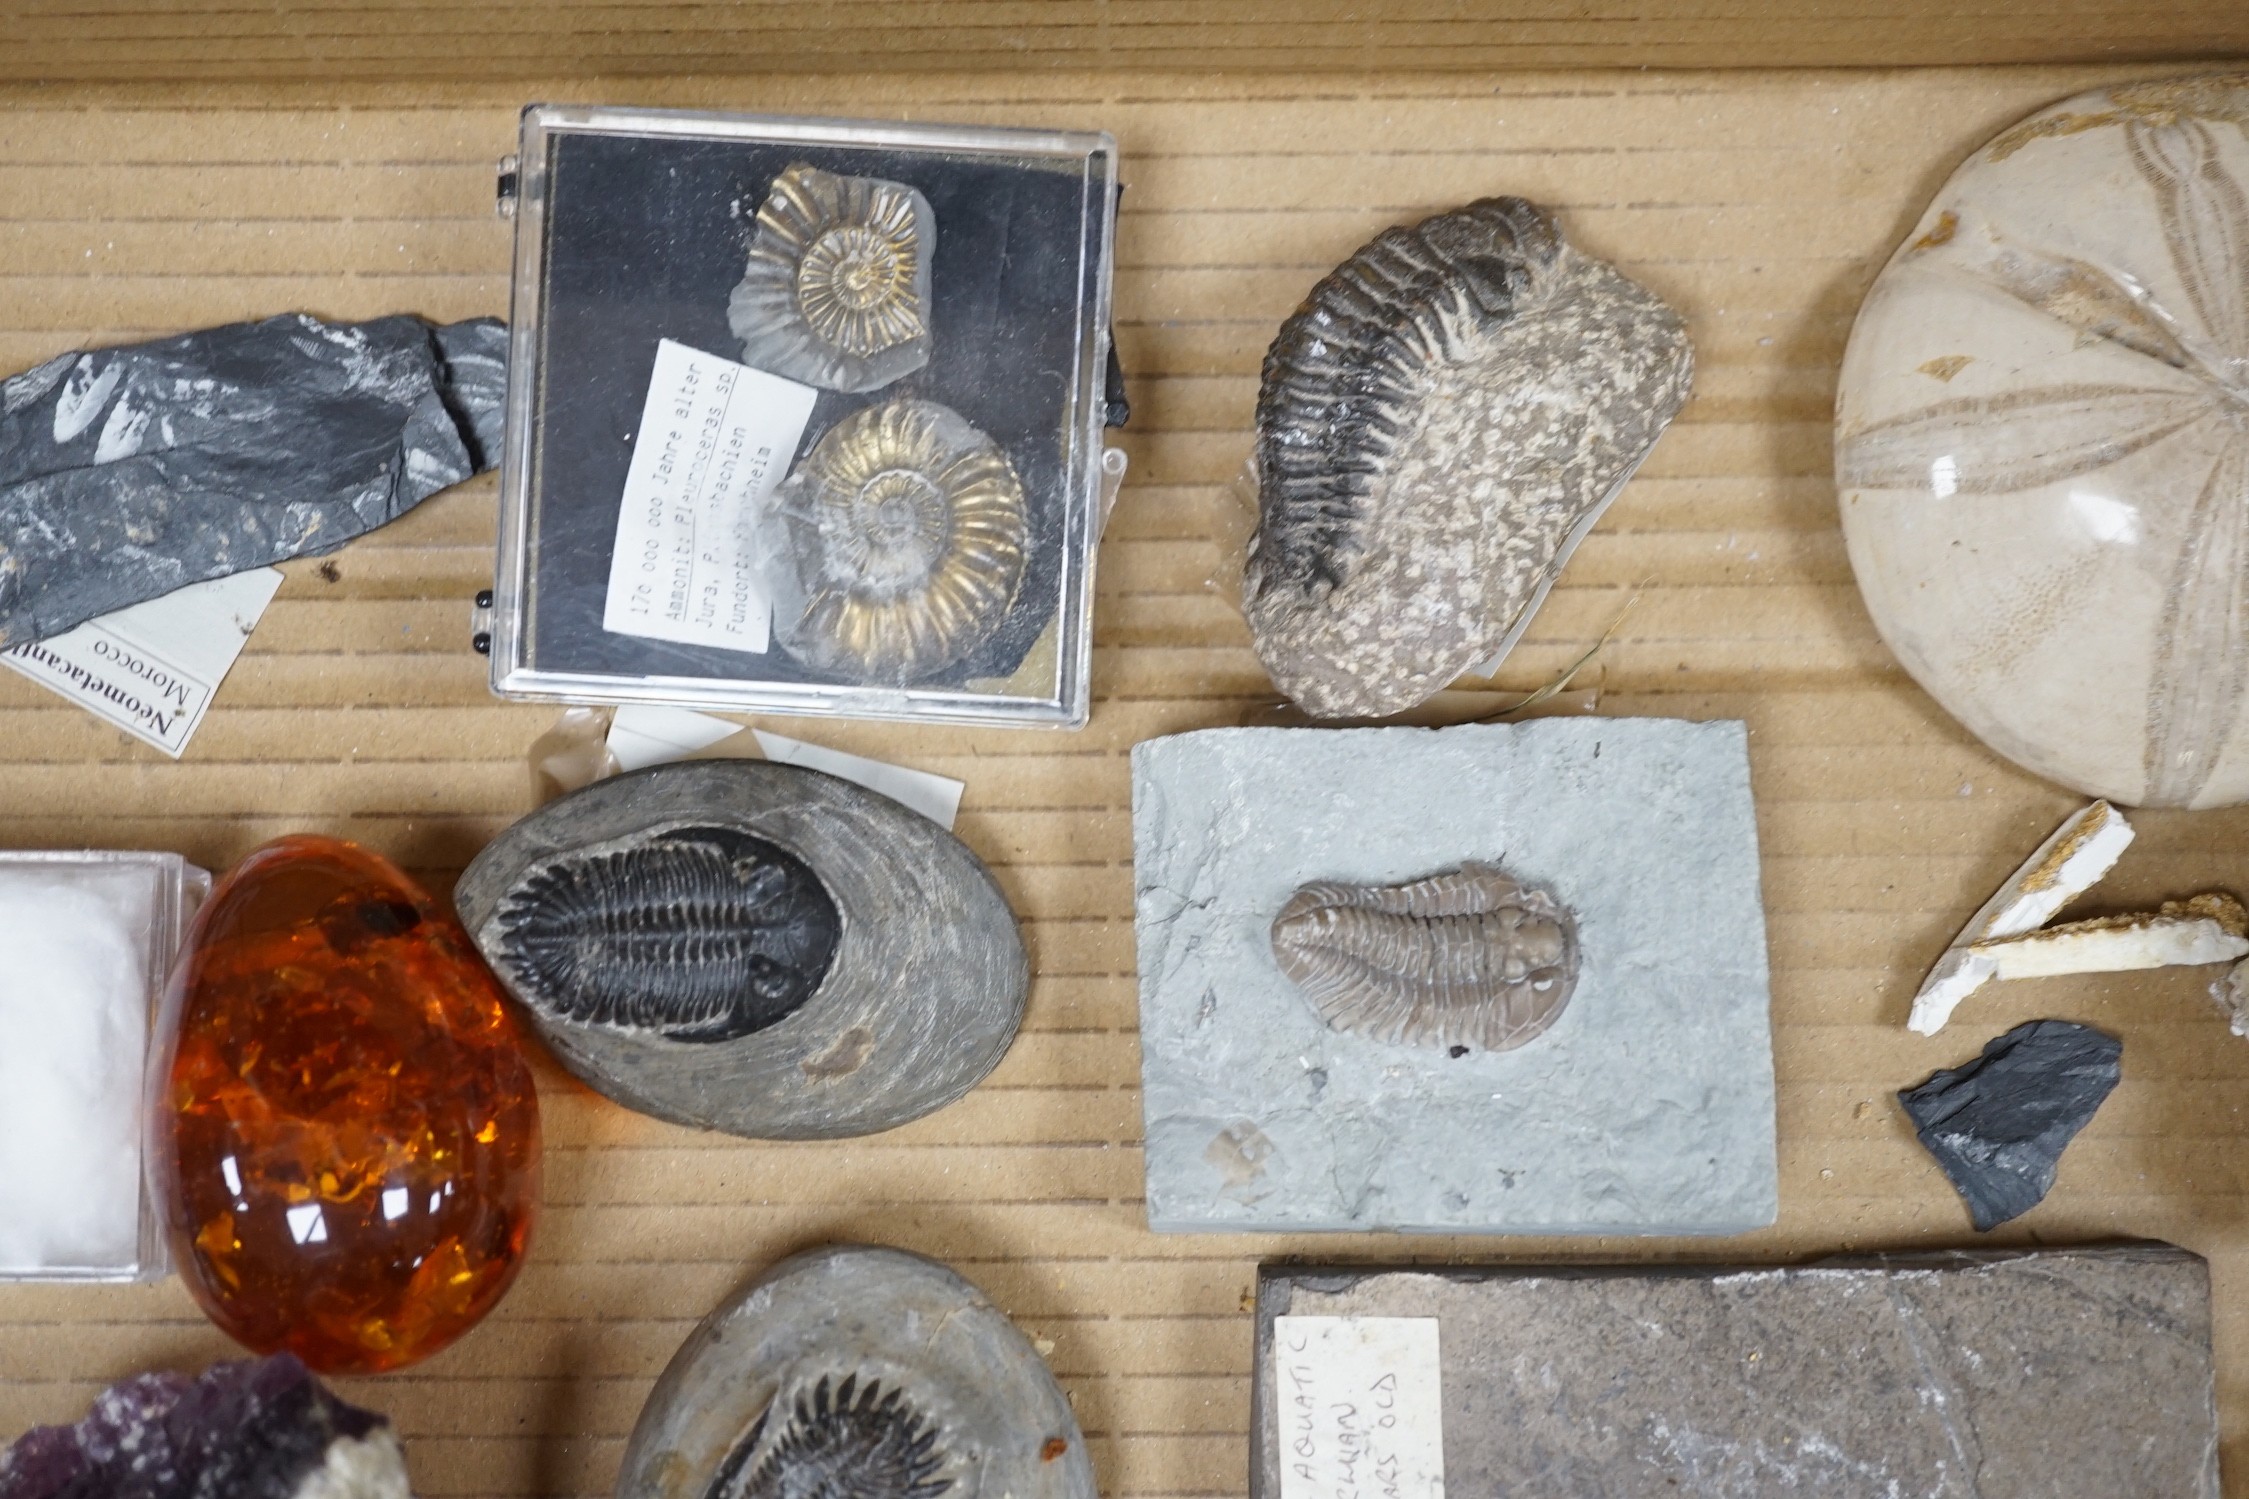 A collection of assorted fossils, minerals and amber